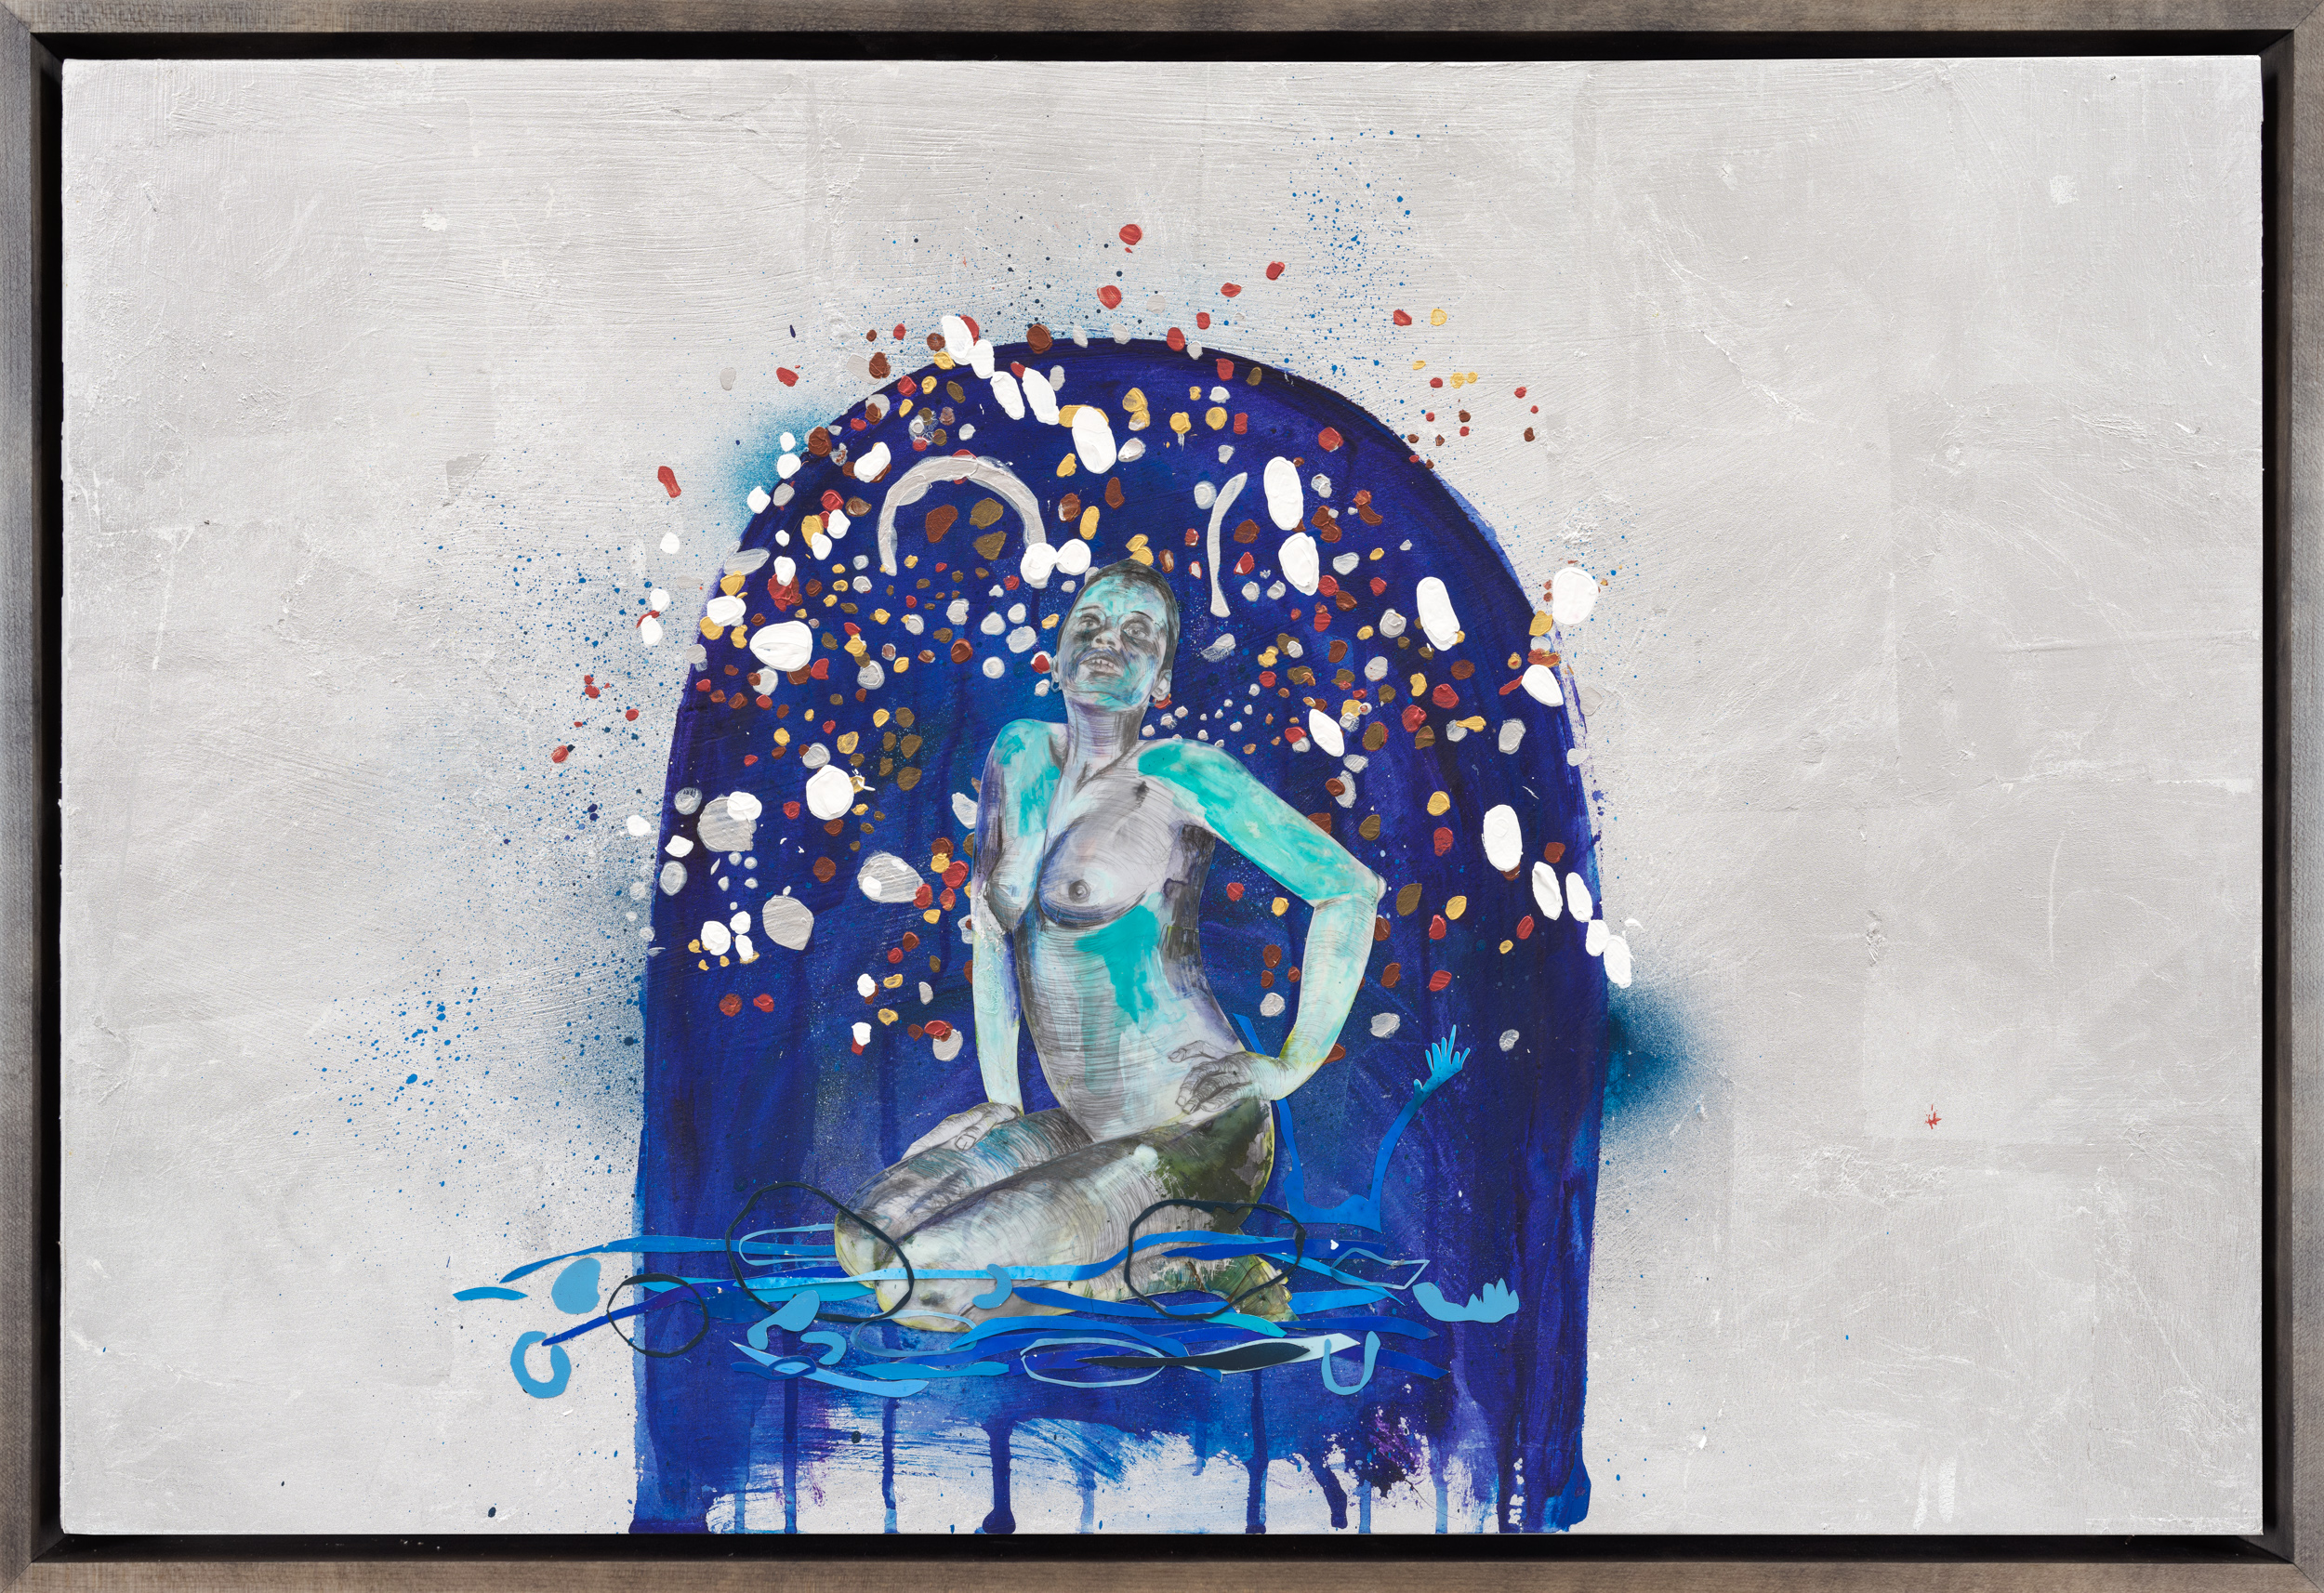 Painting of a blue and teal nude figure sitting in a arch shaped wash of blue on a silver leaf background.